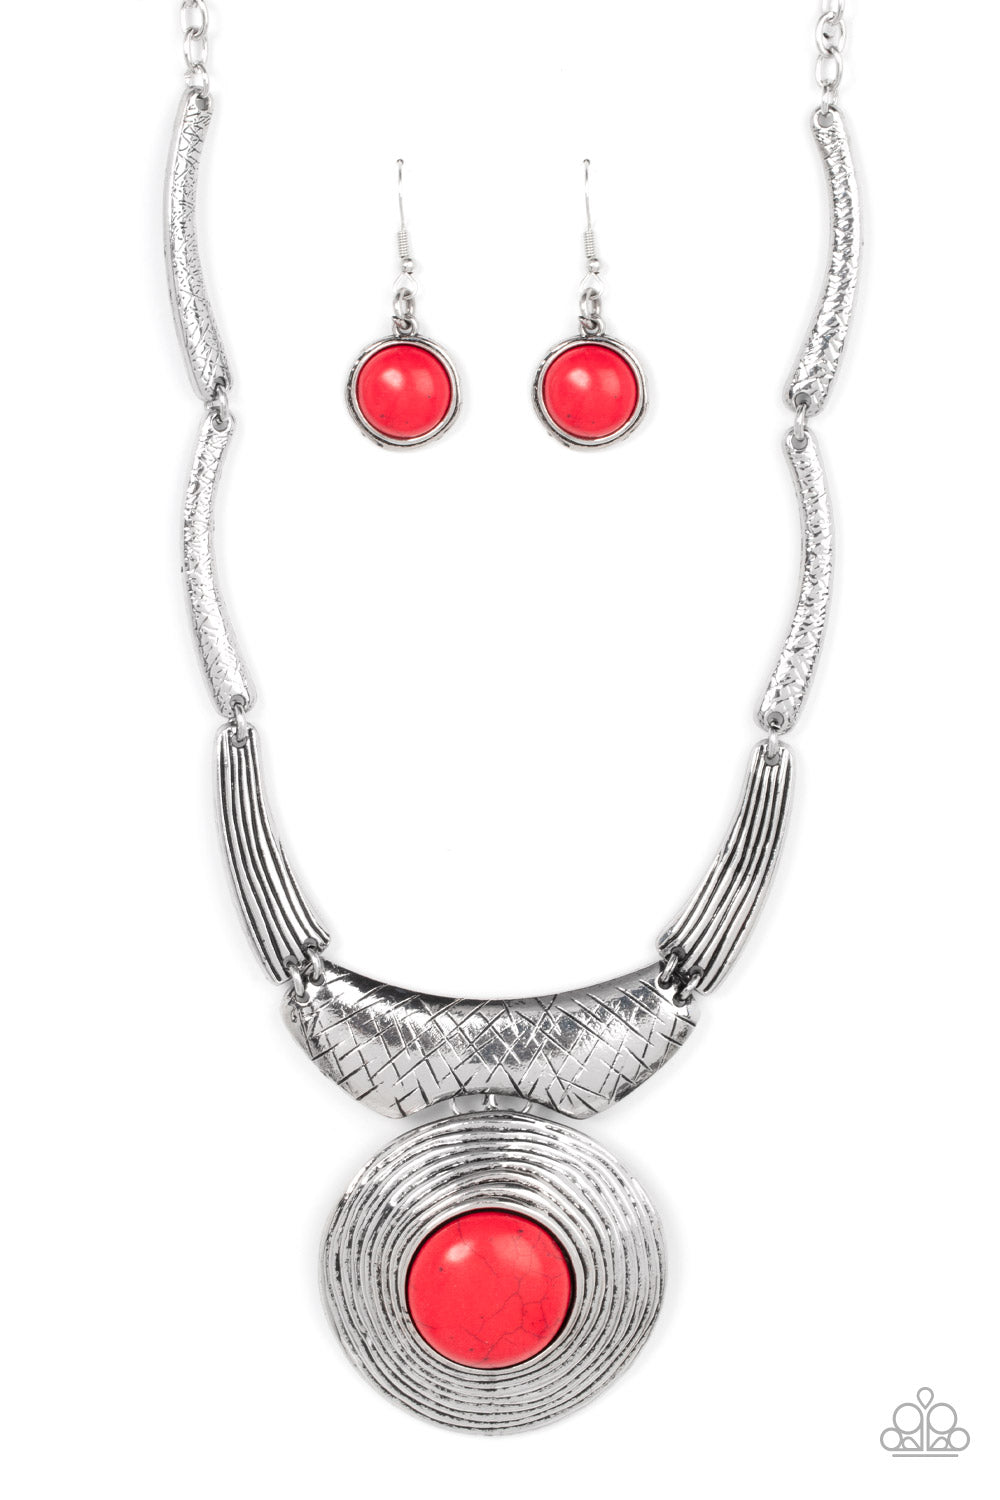 EMPRESS-ive Resume - Red Paparazzi Necklace